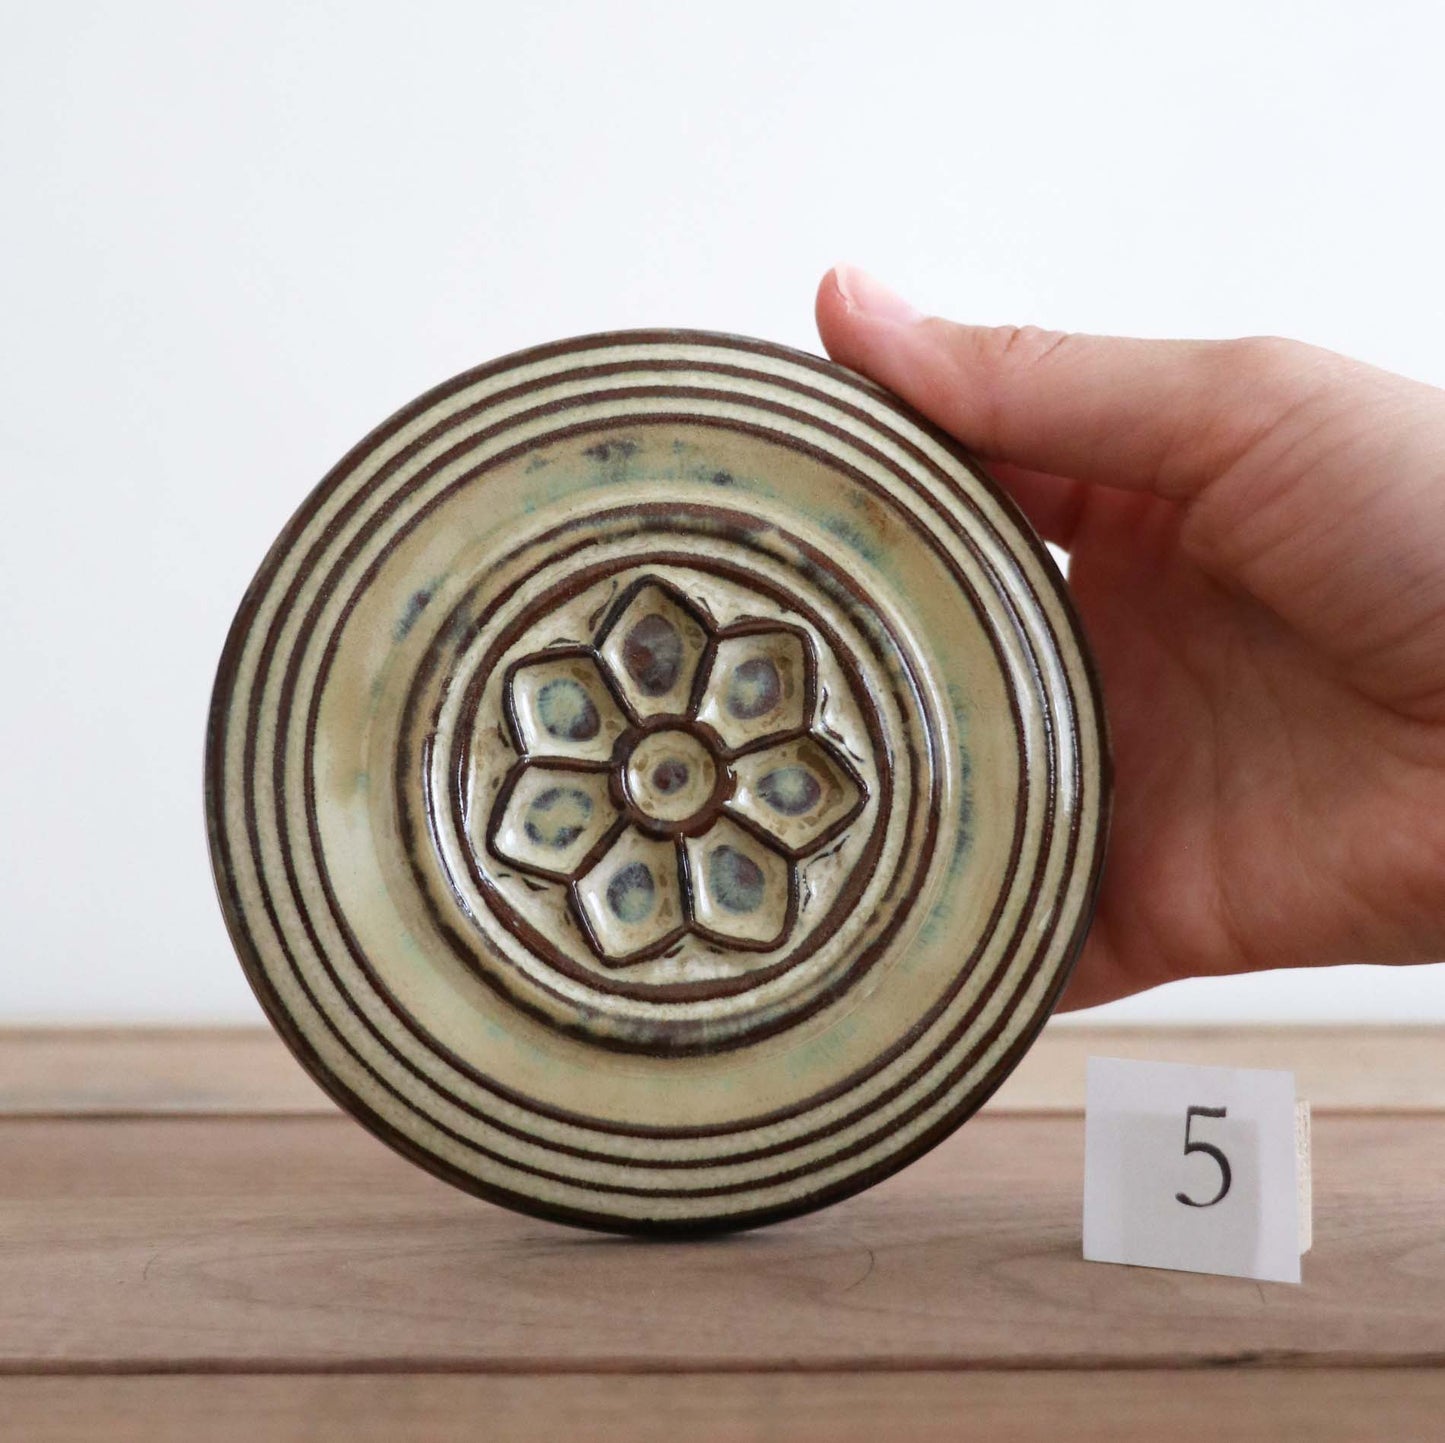 Round Rose Window Wall Tile: 5